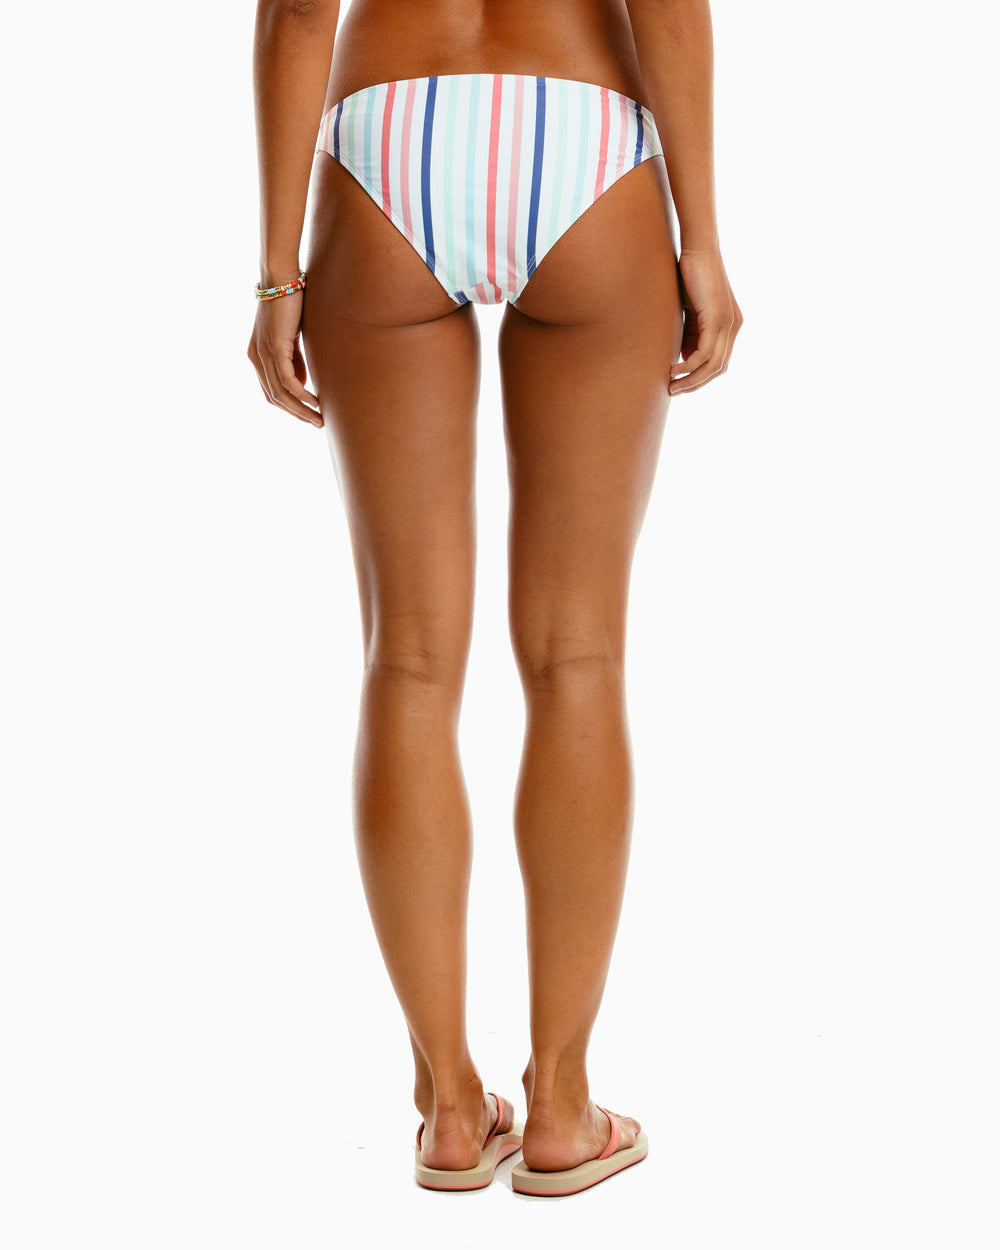 The model back view of the Women's Patio Party Stripe Bikini Bottom by Southern Tide - Rouge Red